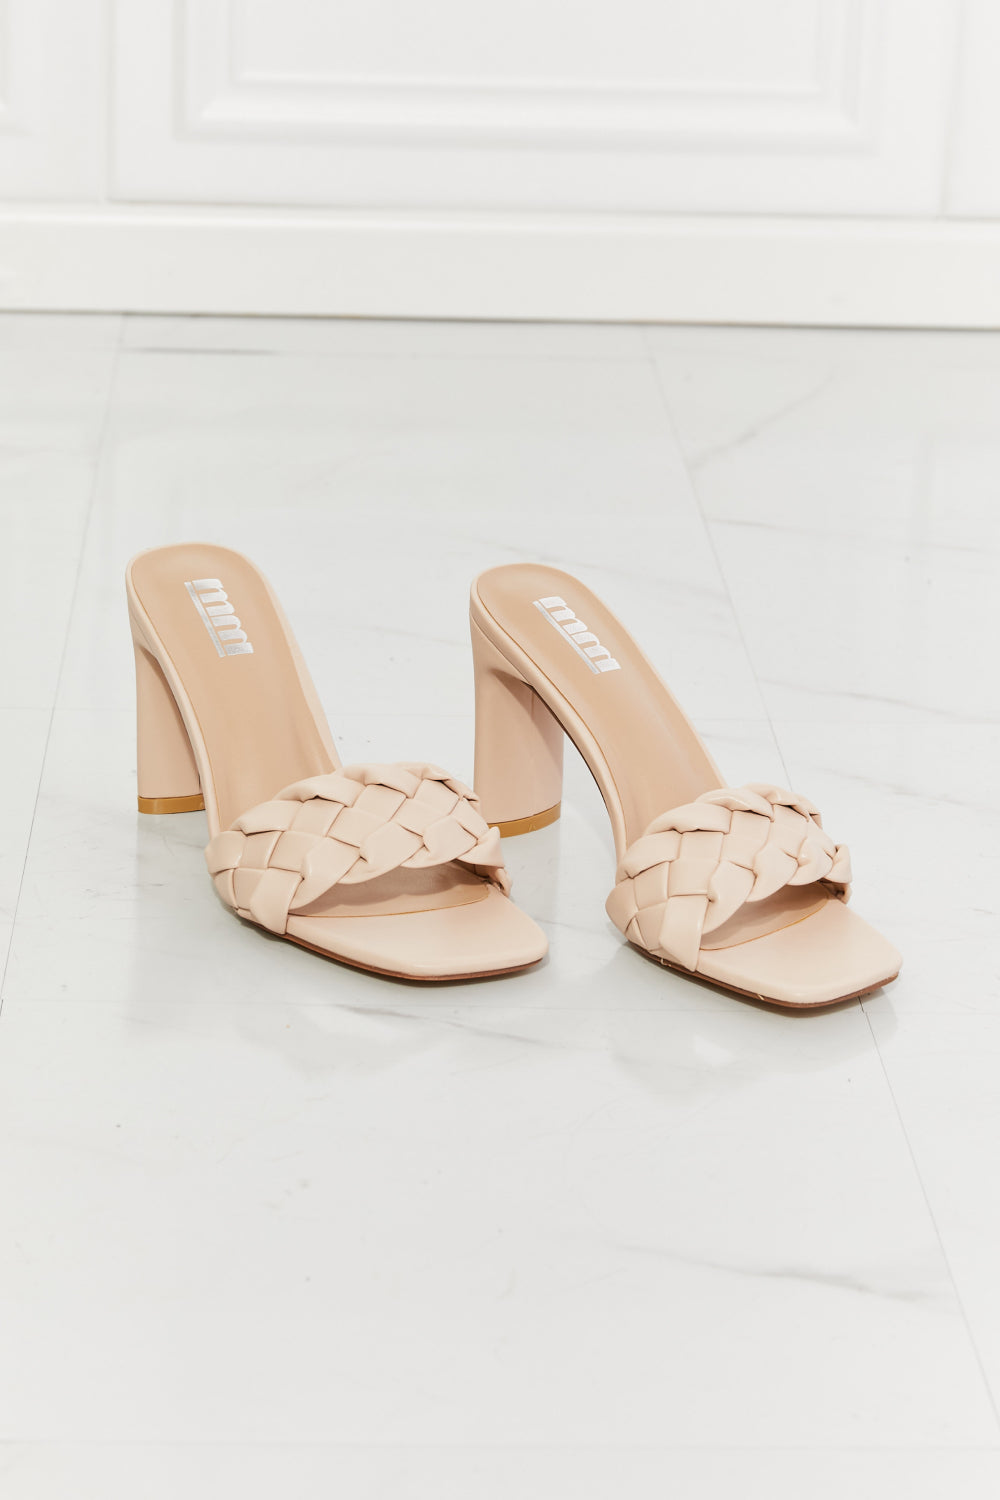 MMShoes Top of the World Braided Block Heel Sandals in Beige Sandals